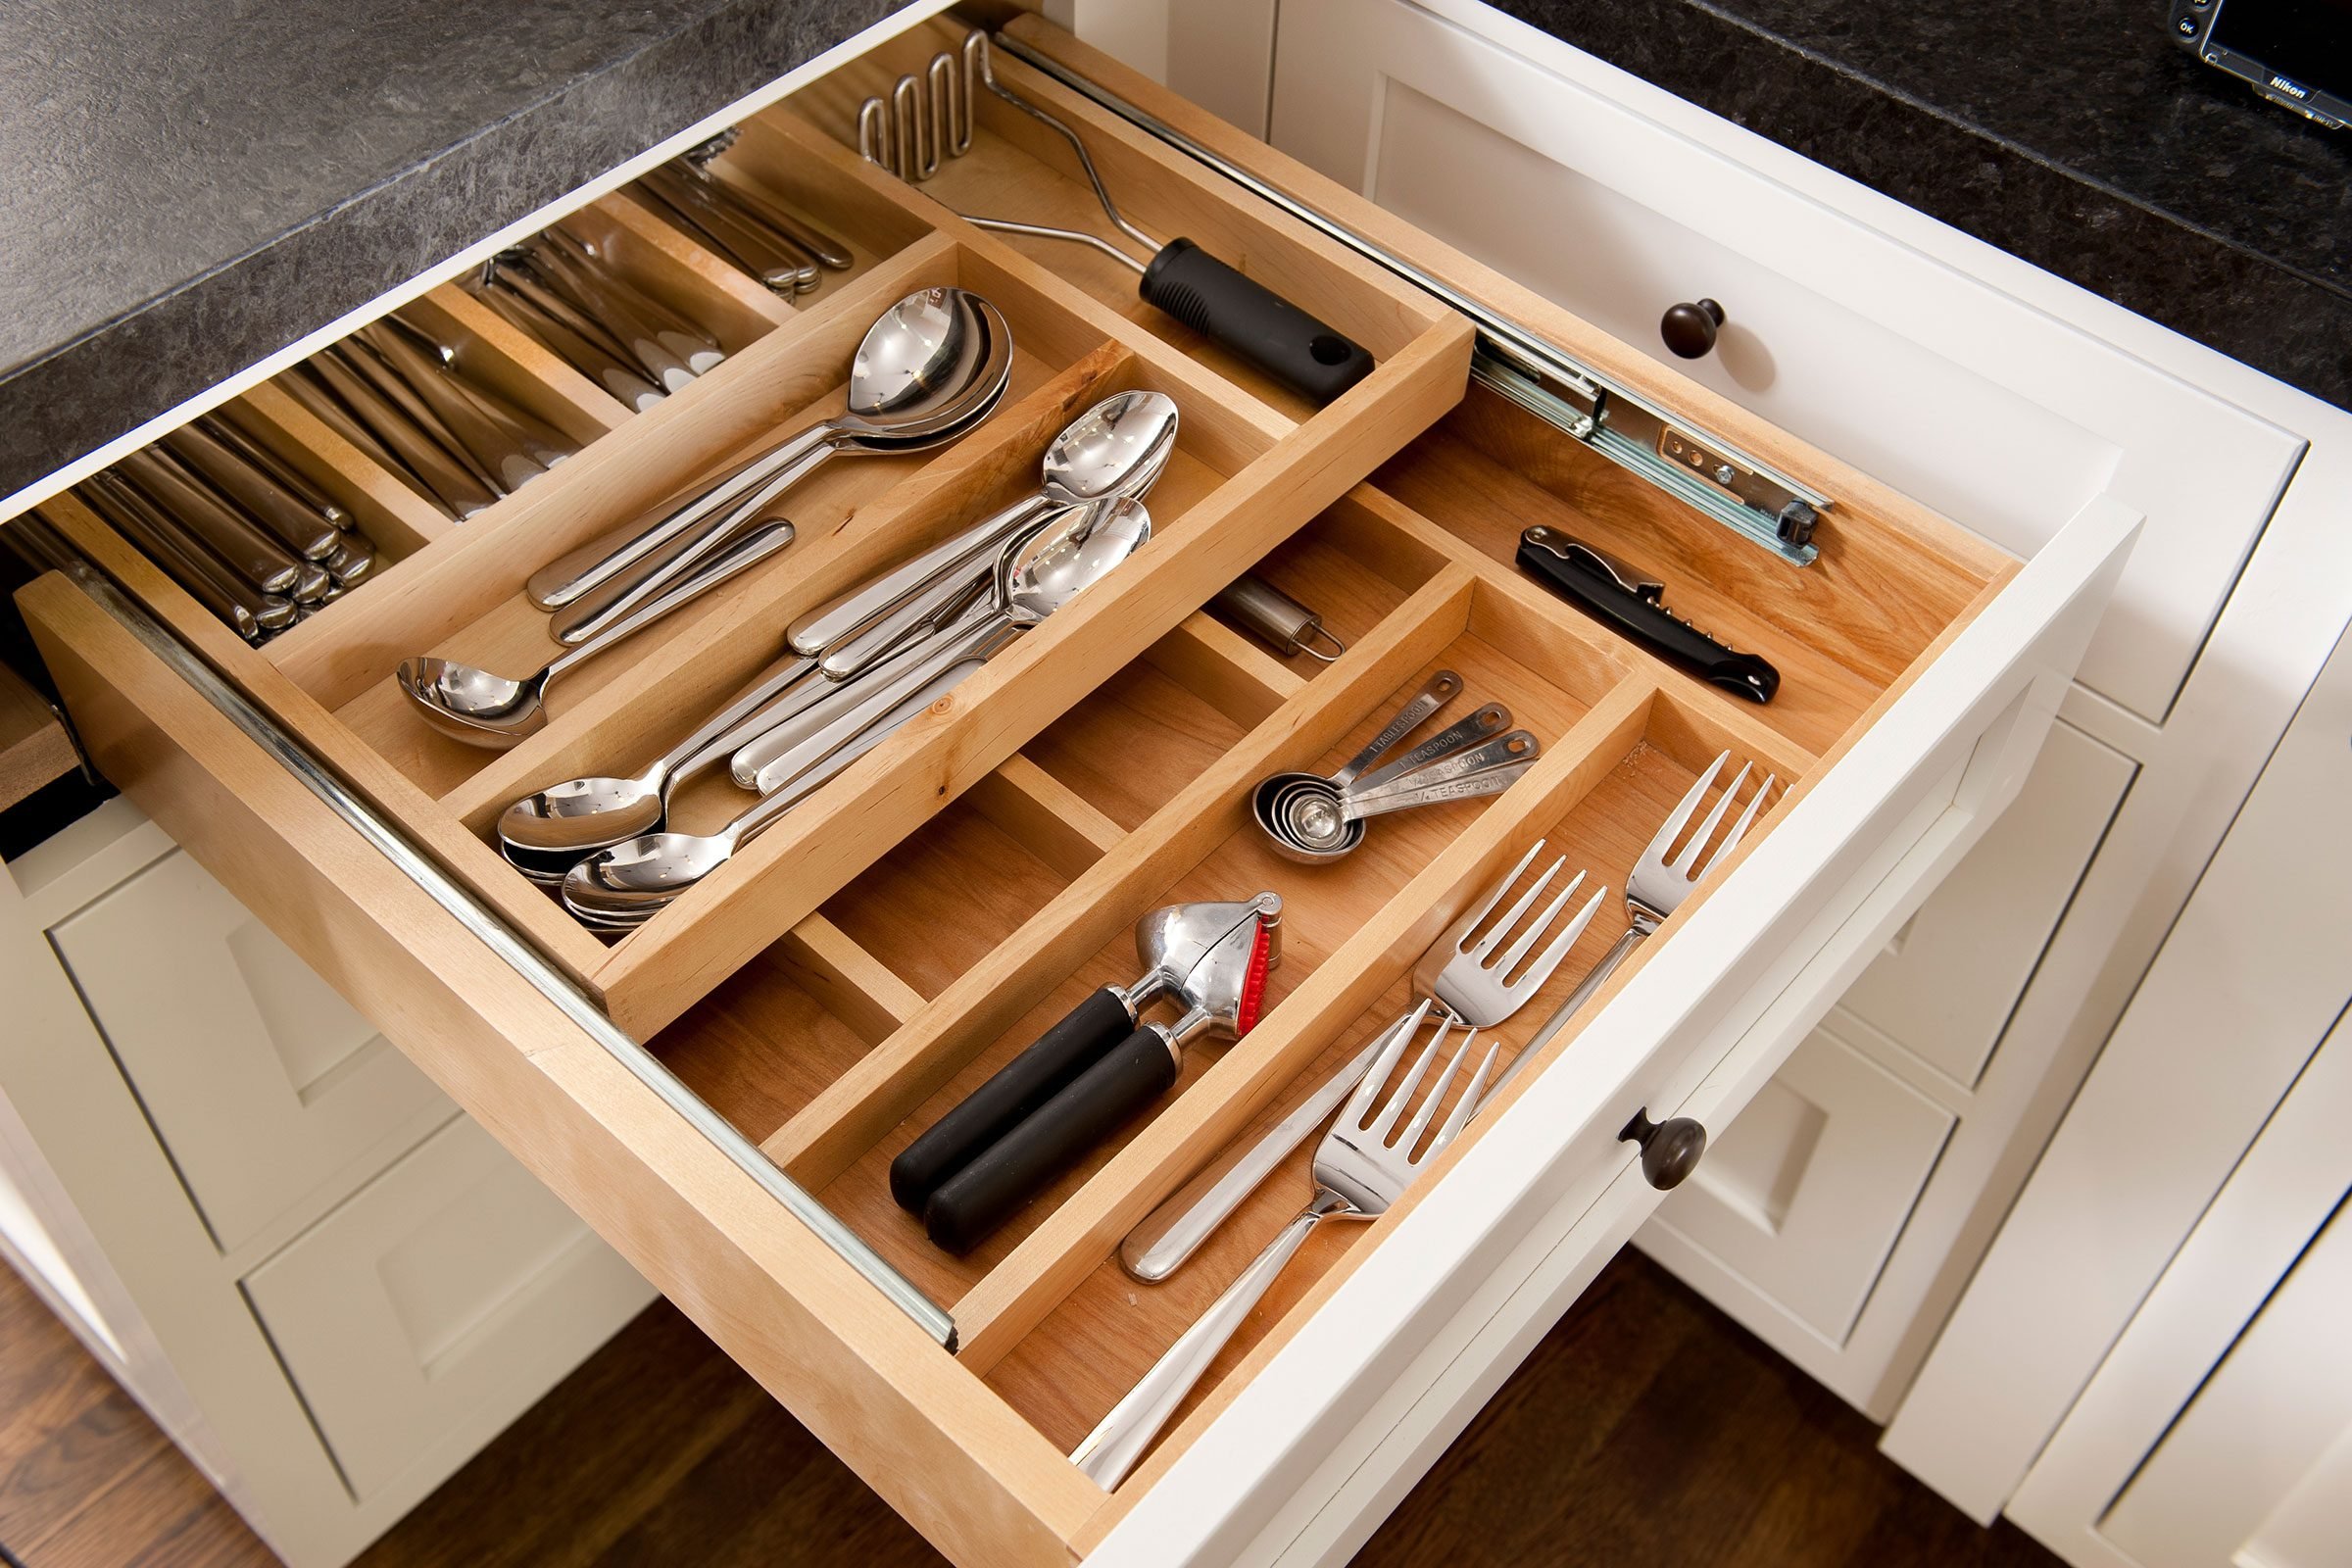 https://www.familyhandyman.com/wp-content/uploads/2023/01/GettyImages-178952317-Ikea-Double-Drawer-Storage-Hack-DH-FHM.jpg